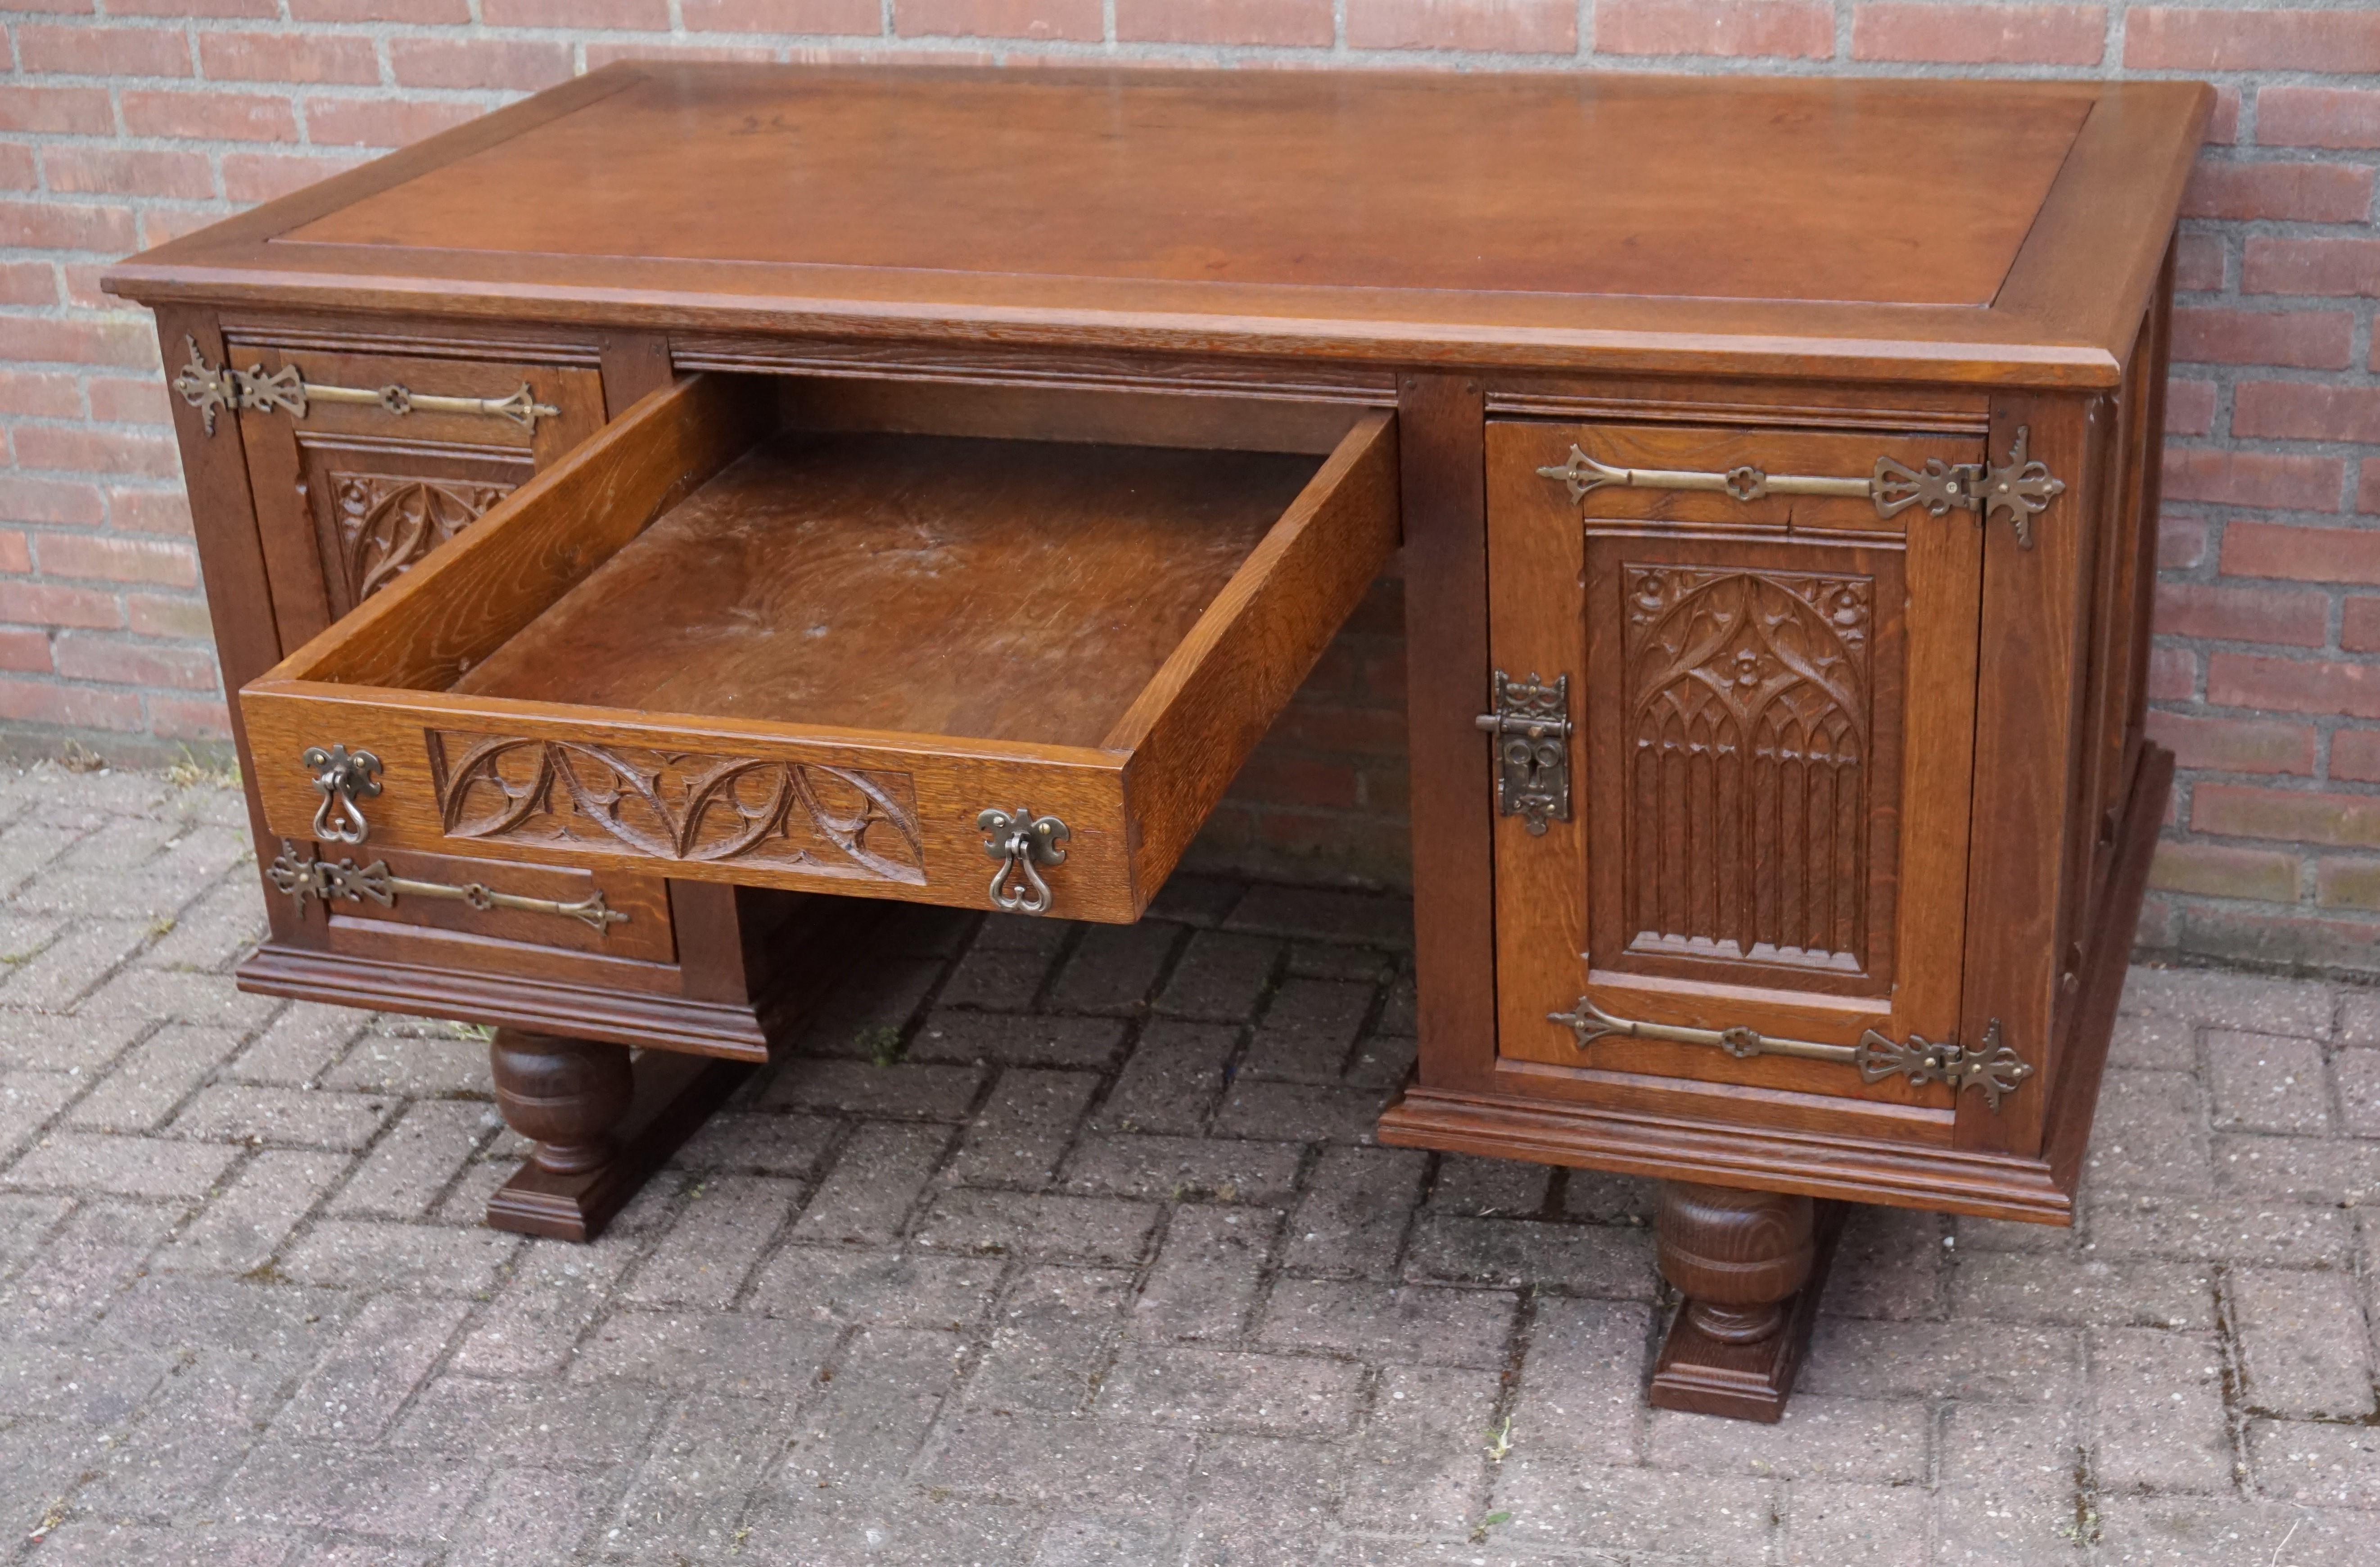 Antique Hand Carved Gothic Revival Desk with Leather Top and Wrought Iron Hinges For Sale 7